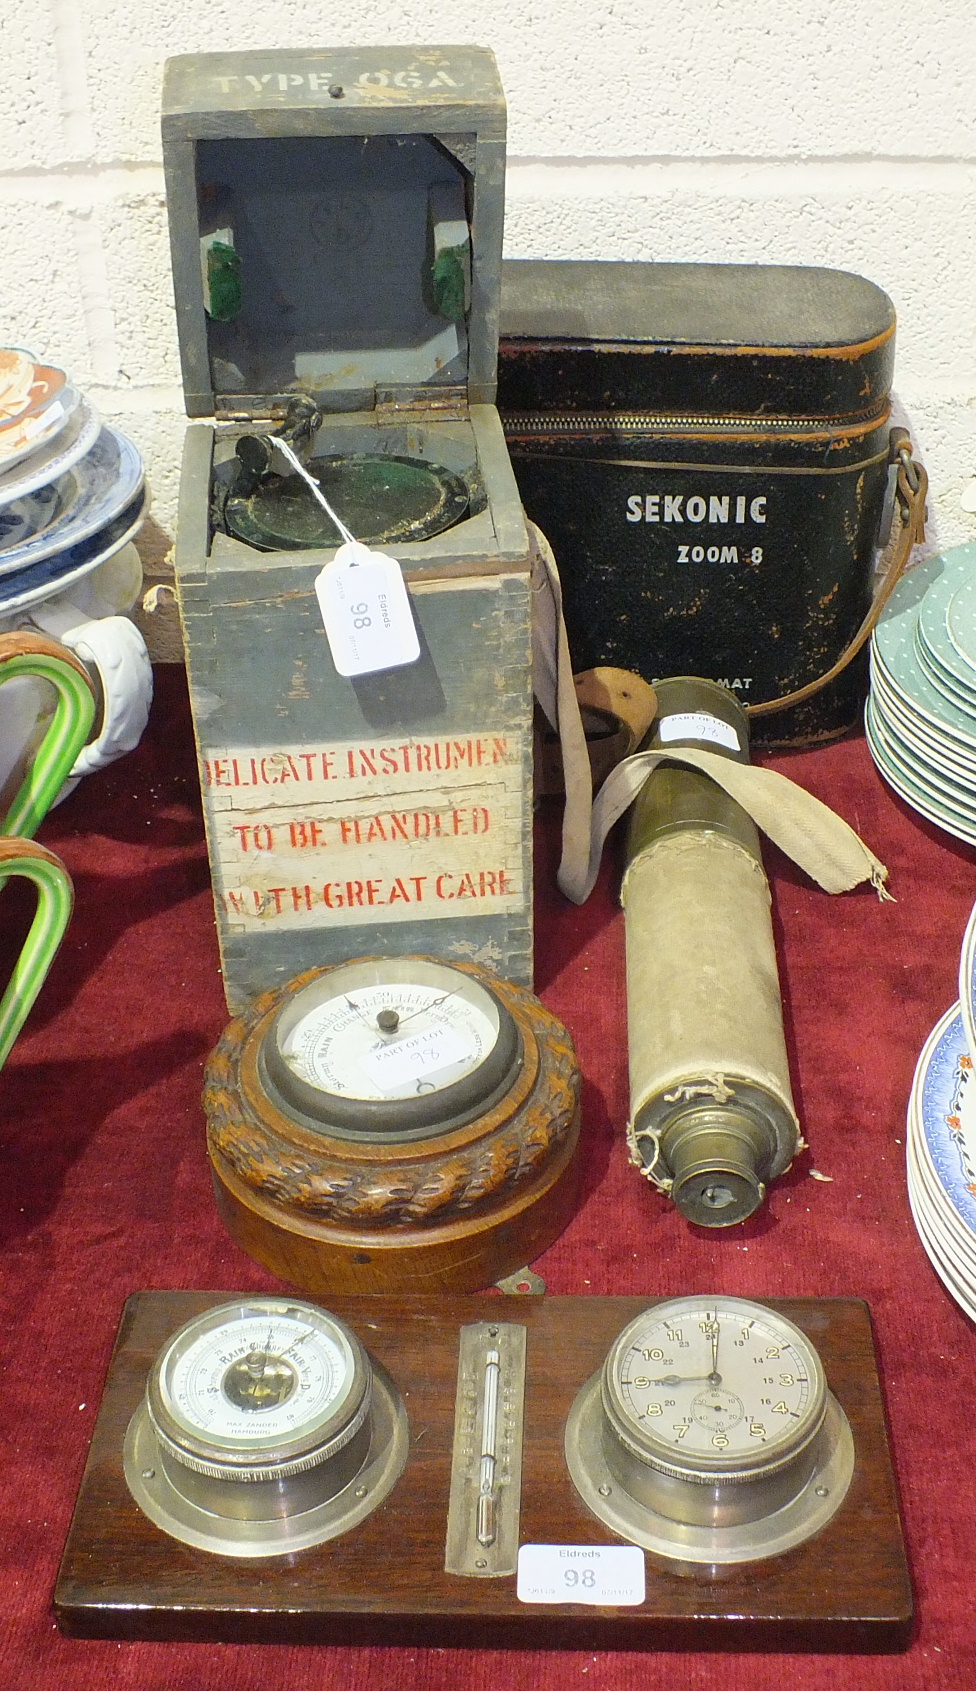 A Type 06 A military compass No. 19807D, in carrying box, a small circular metal aneroid